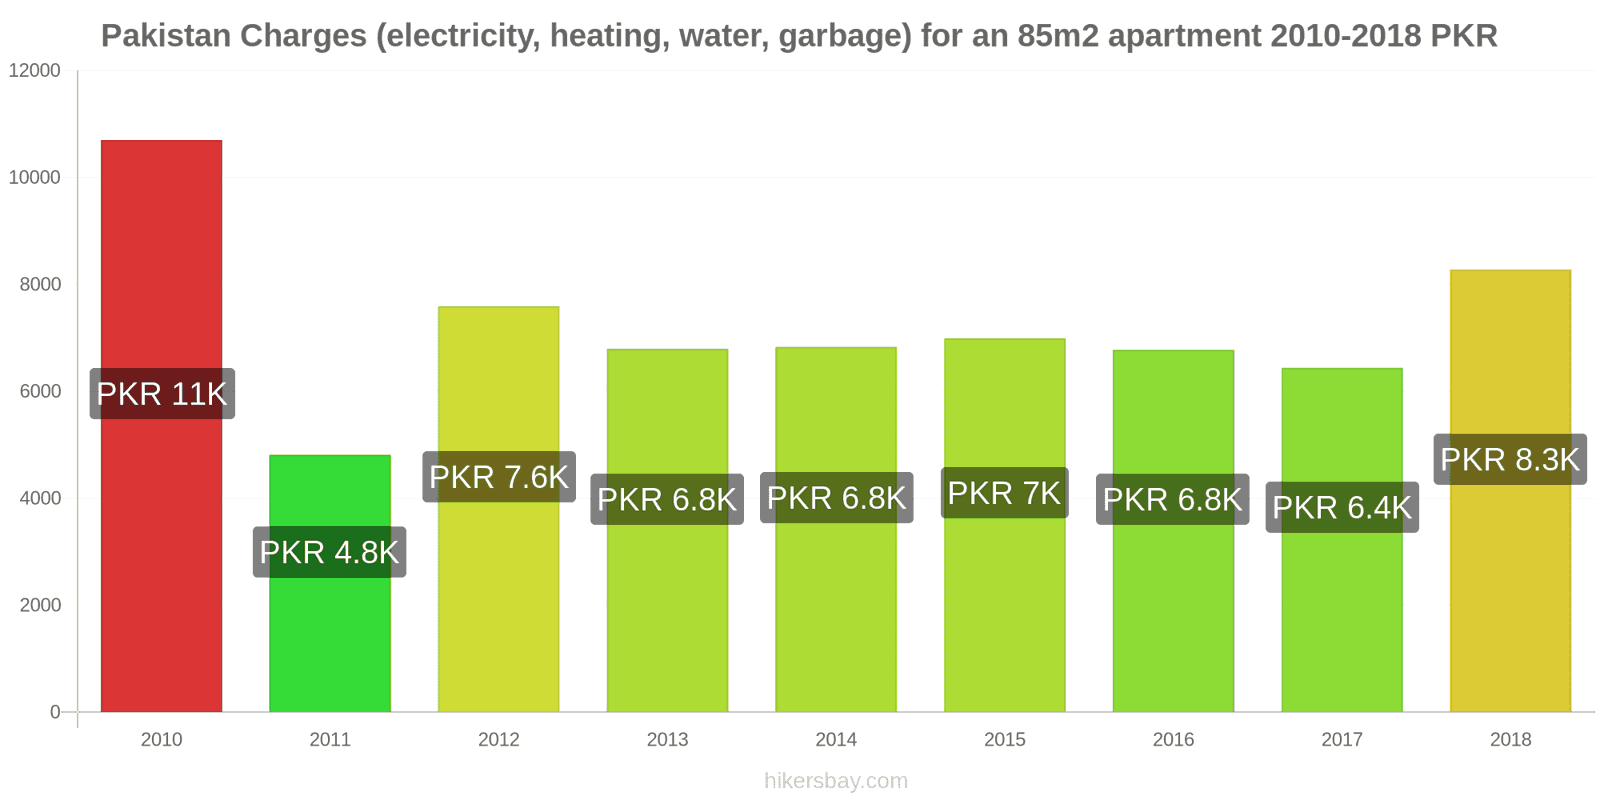 Pakistan price changes Utilities (electricity, heating, water, garbage) for an 85m2 apartment hikersbay.com